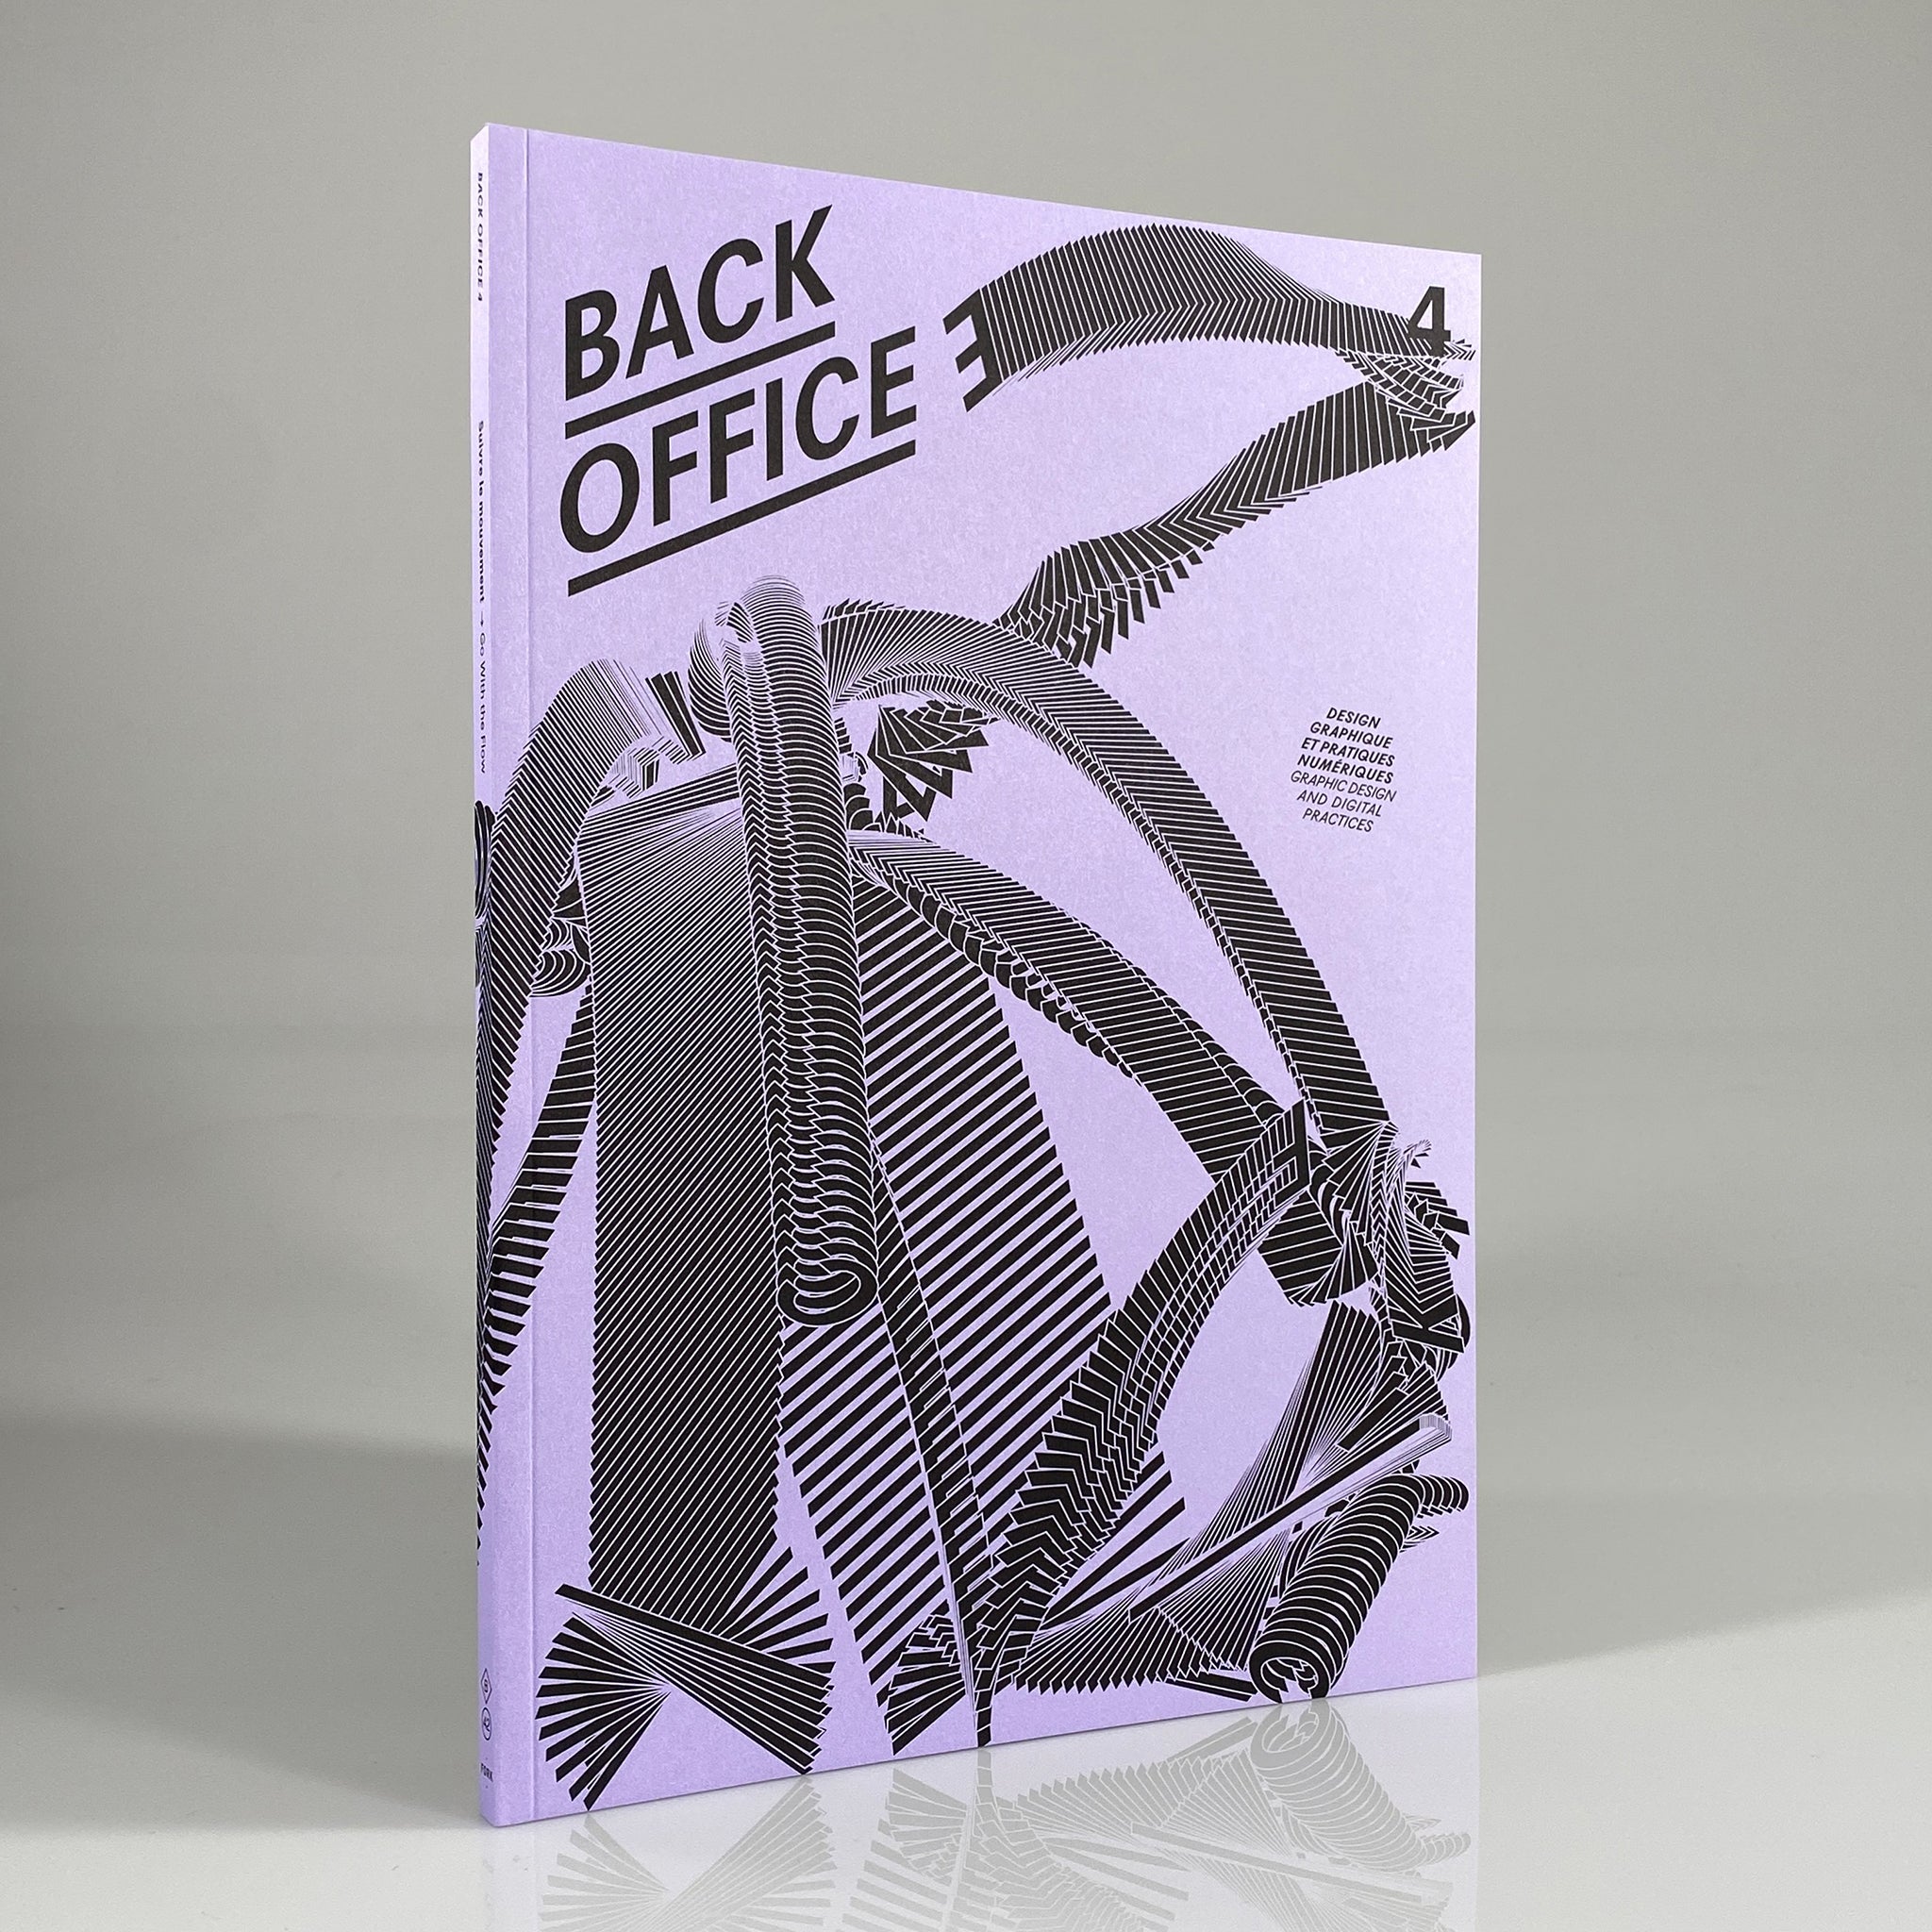 Back Office 4: Graphic Design and Digital Practices